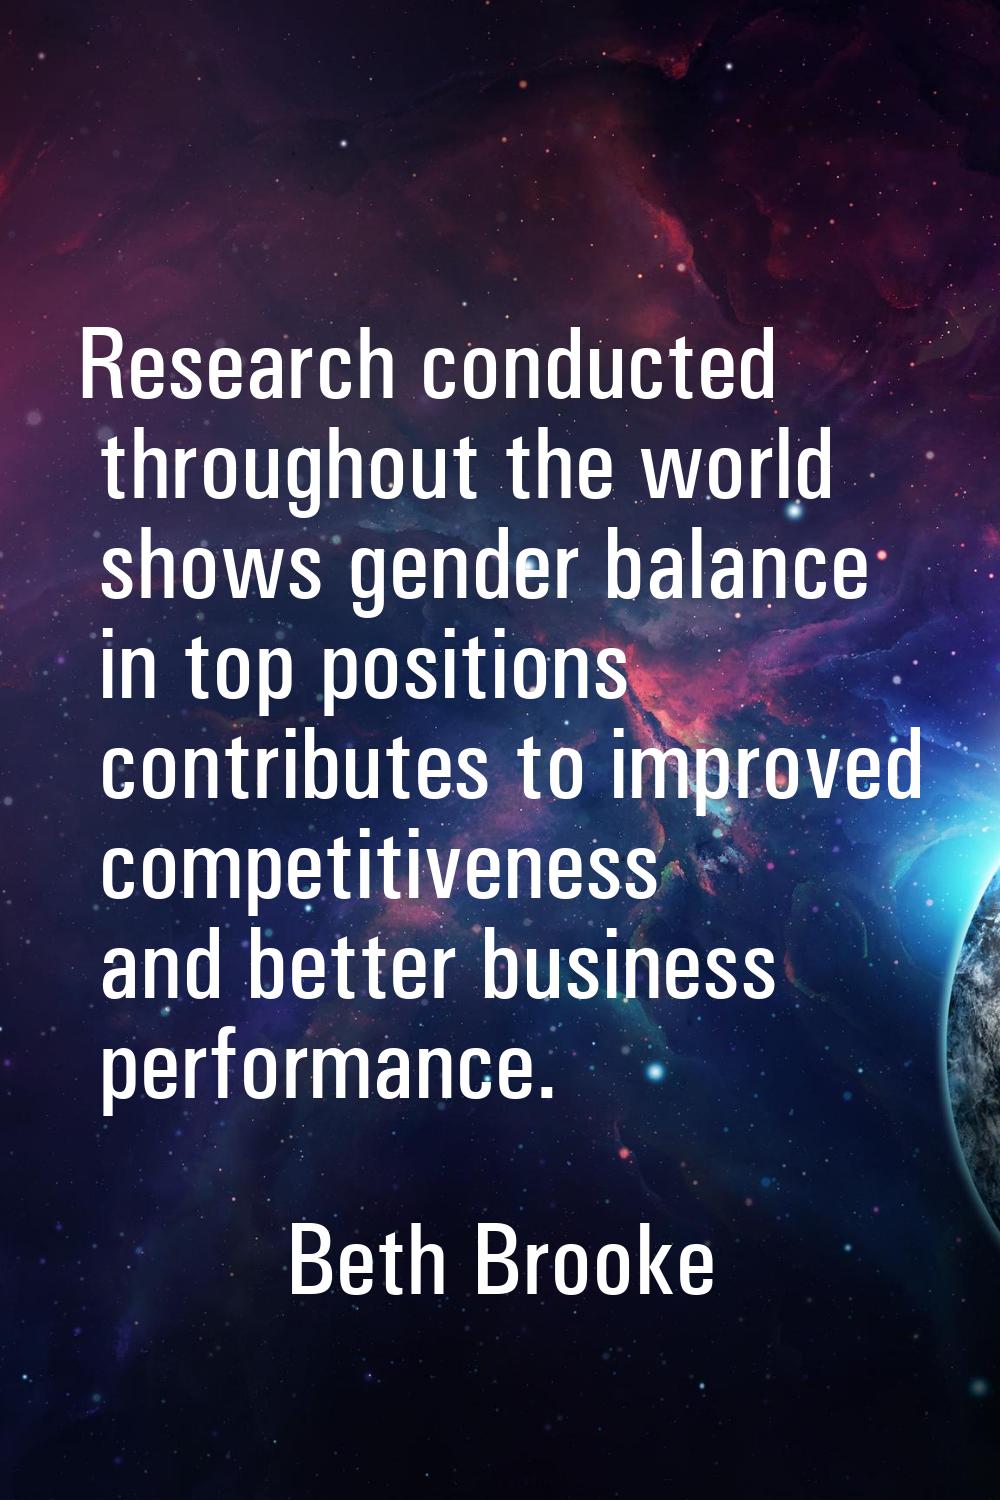 Research conducted throughout the world shows gender balance in top positions contributes to improv